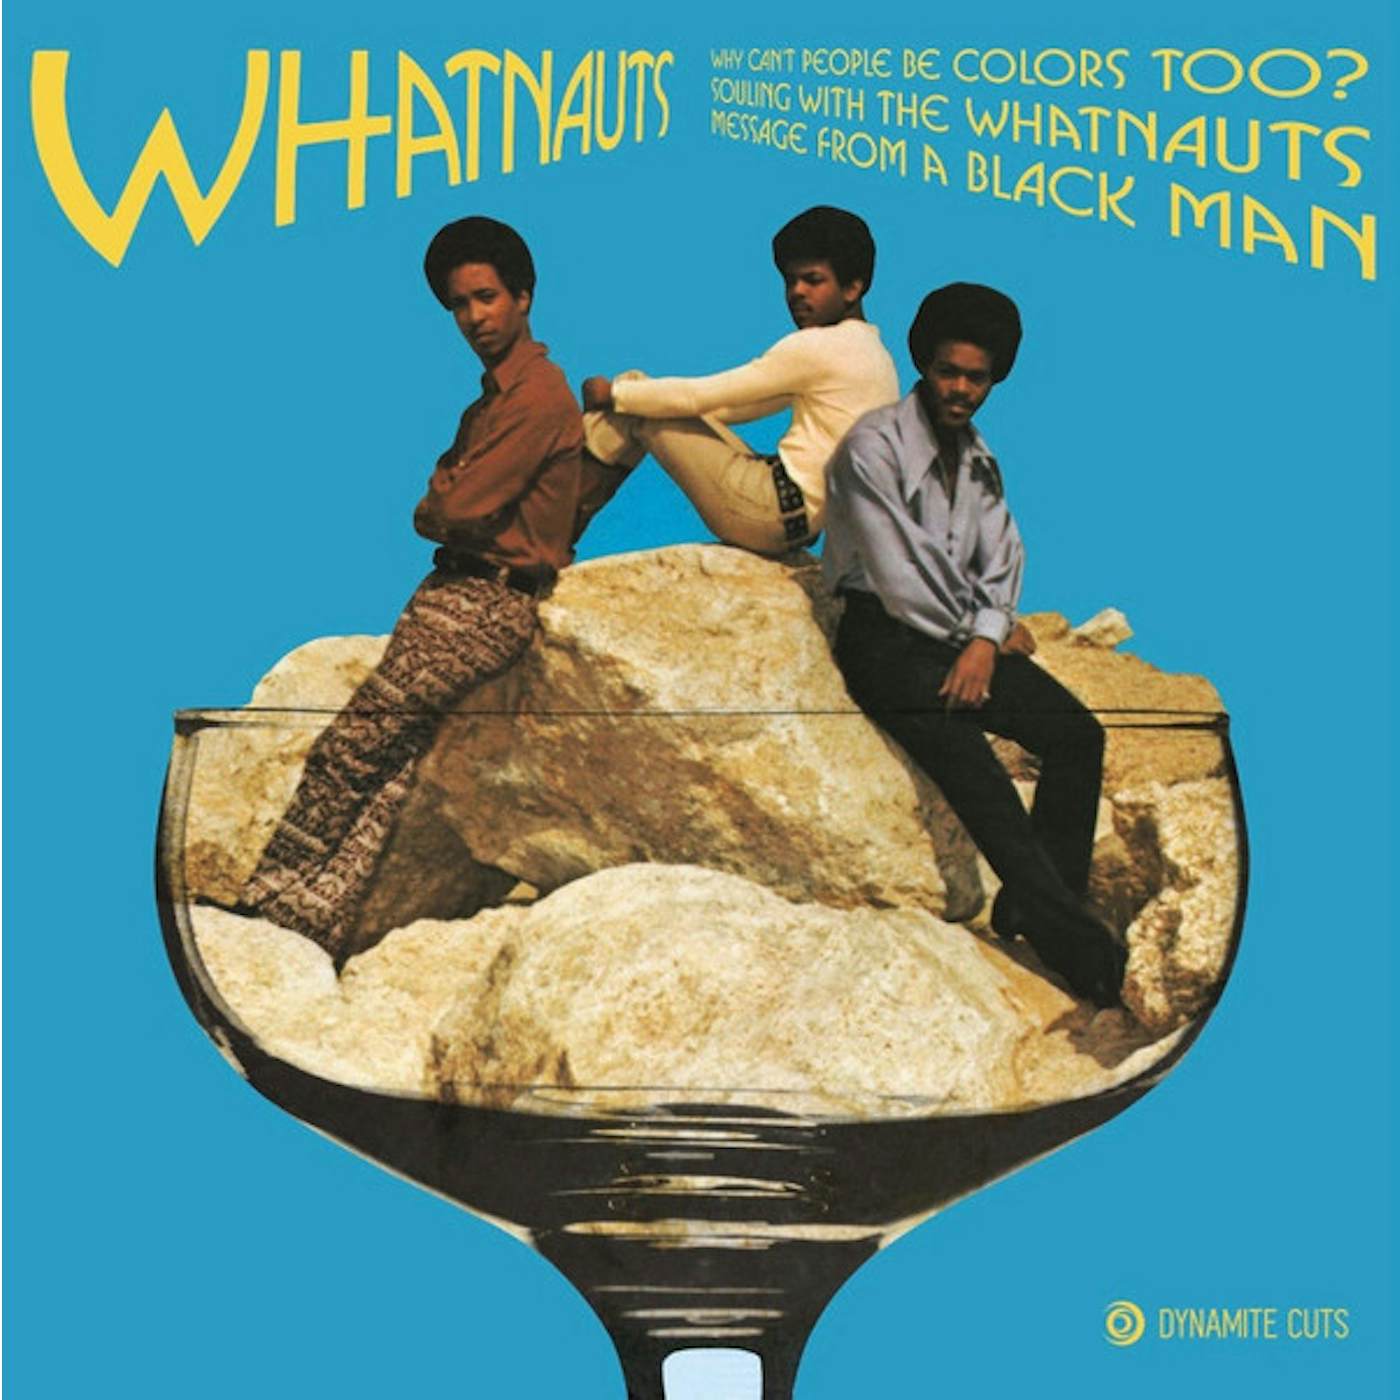 The Whatnauts WHY CAN'T PEOPLE BE COLORS TOO Vinyl Record